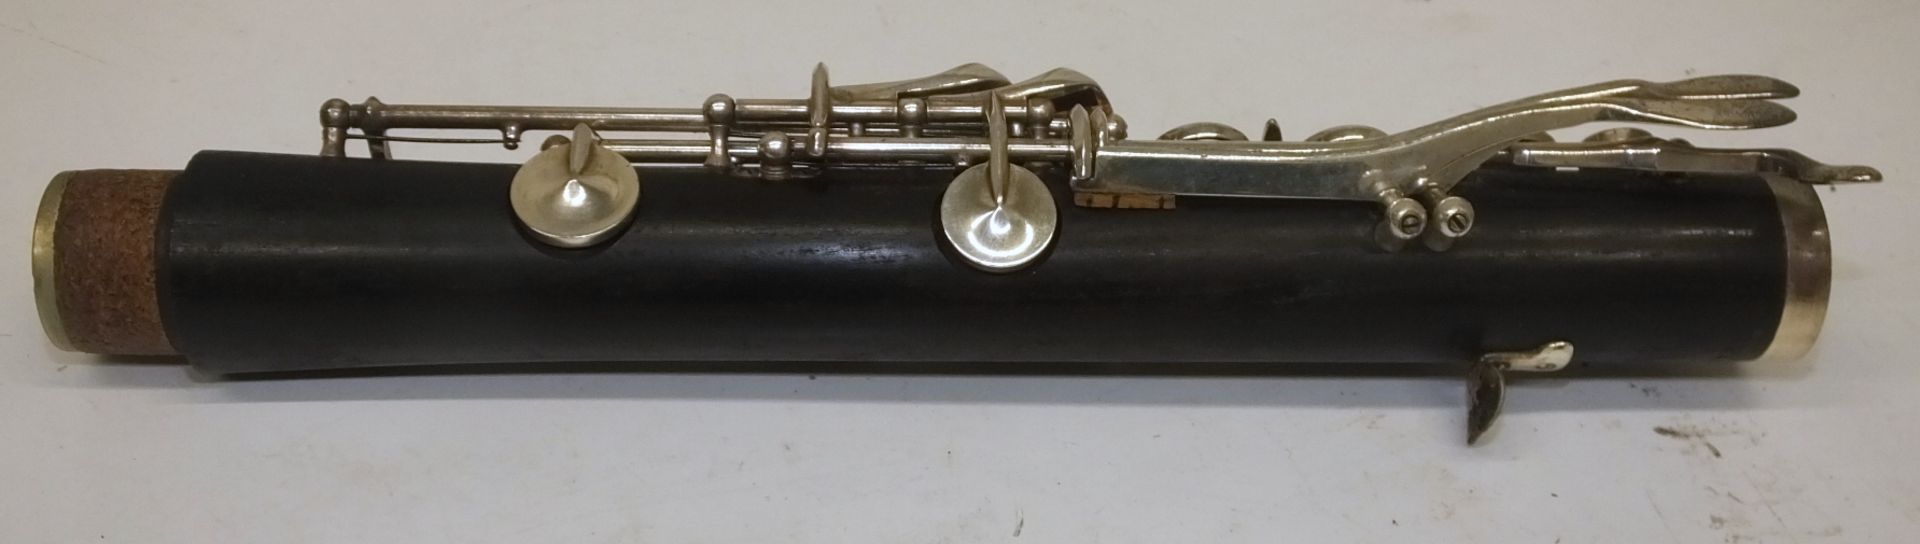 Boosey & Hawkes Imperial 926 Clarinet - Serial Number - 504212 (as spares) - Image 6 of 15